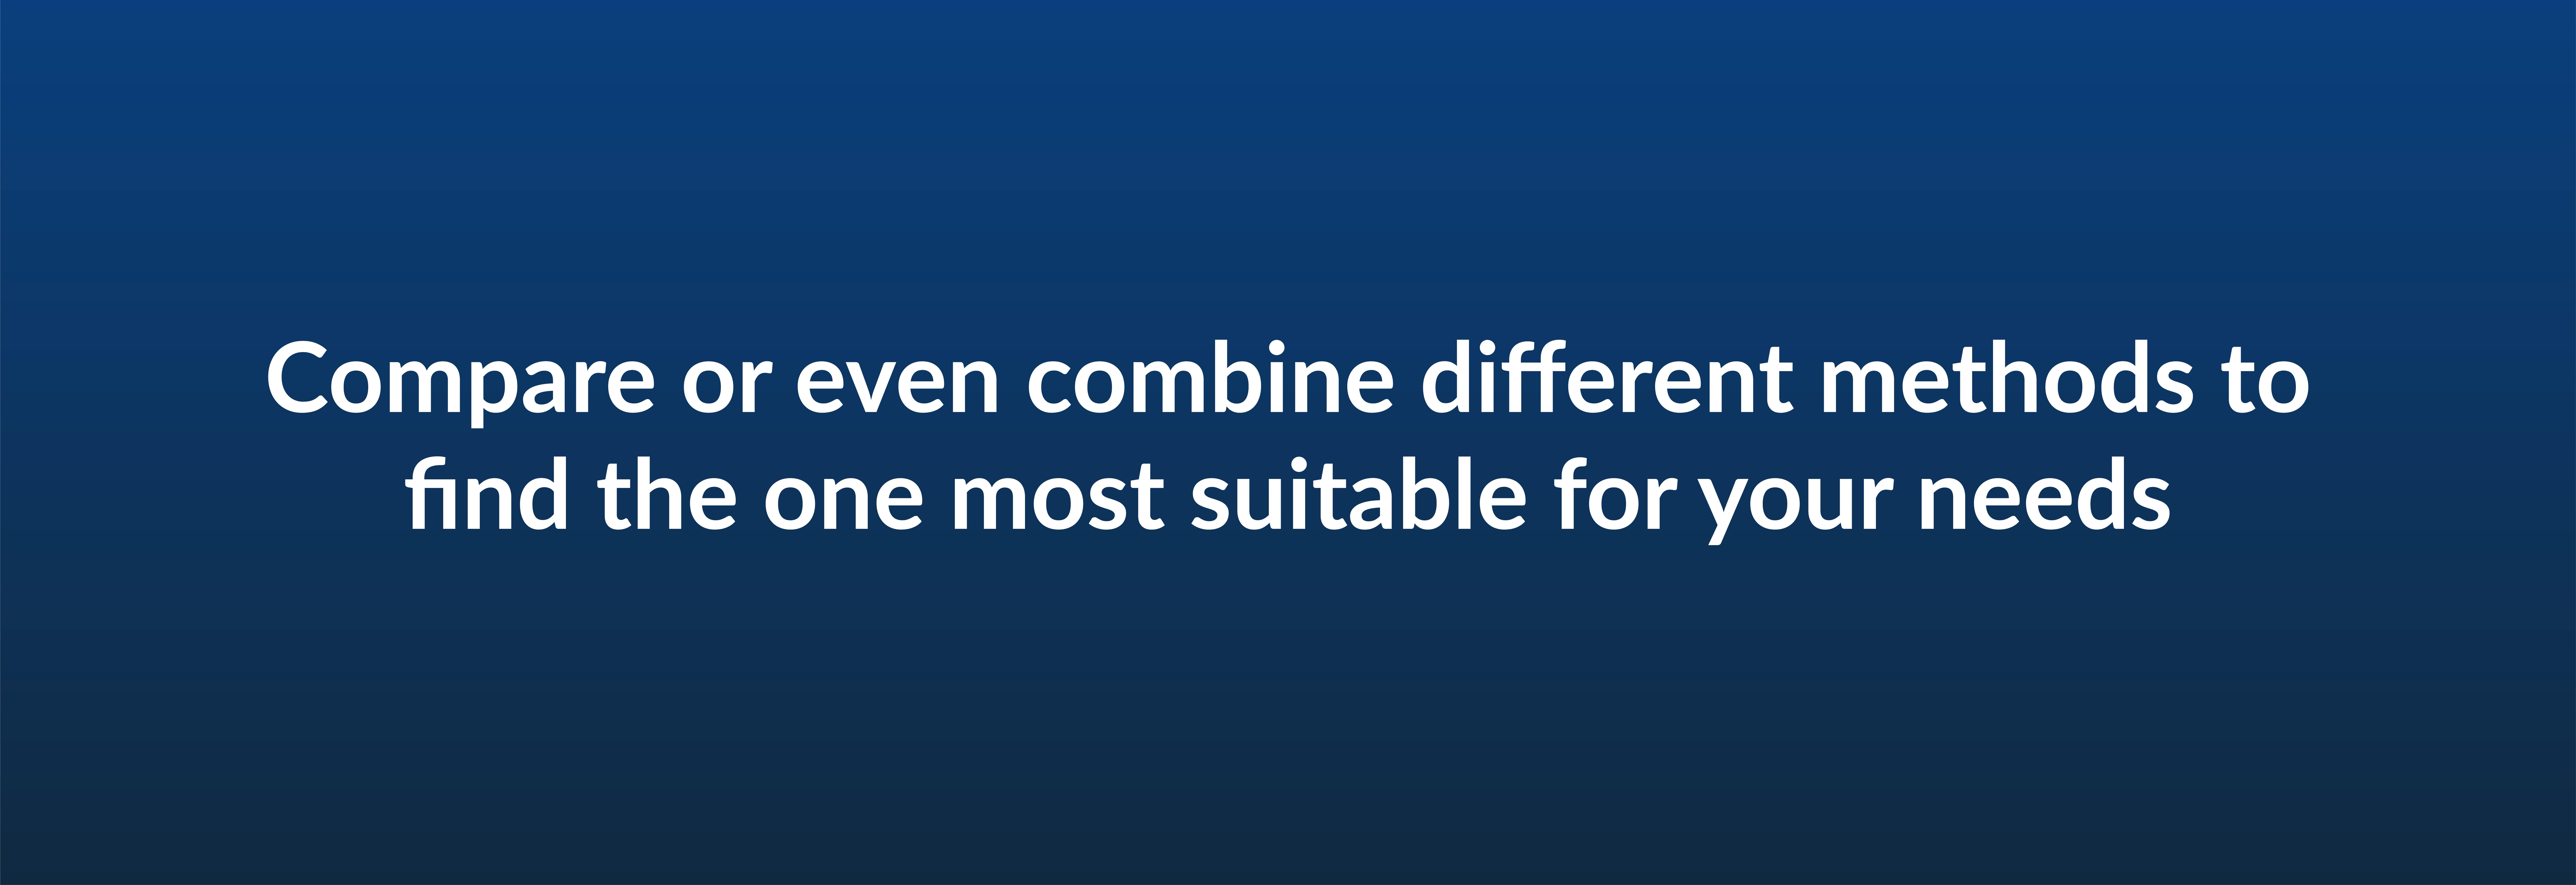 Compare or even combine different methods to find the one most suitable for your needs